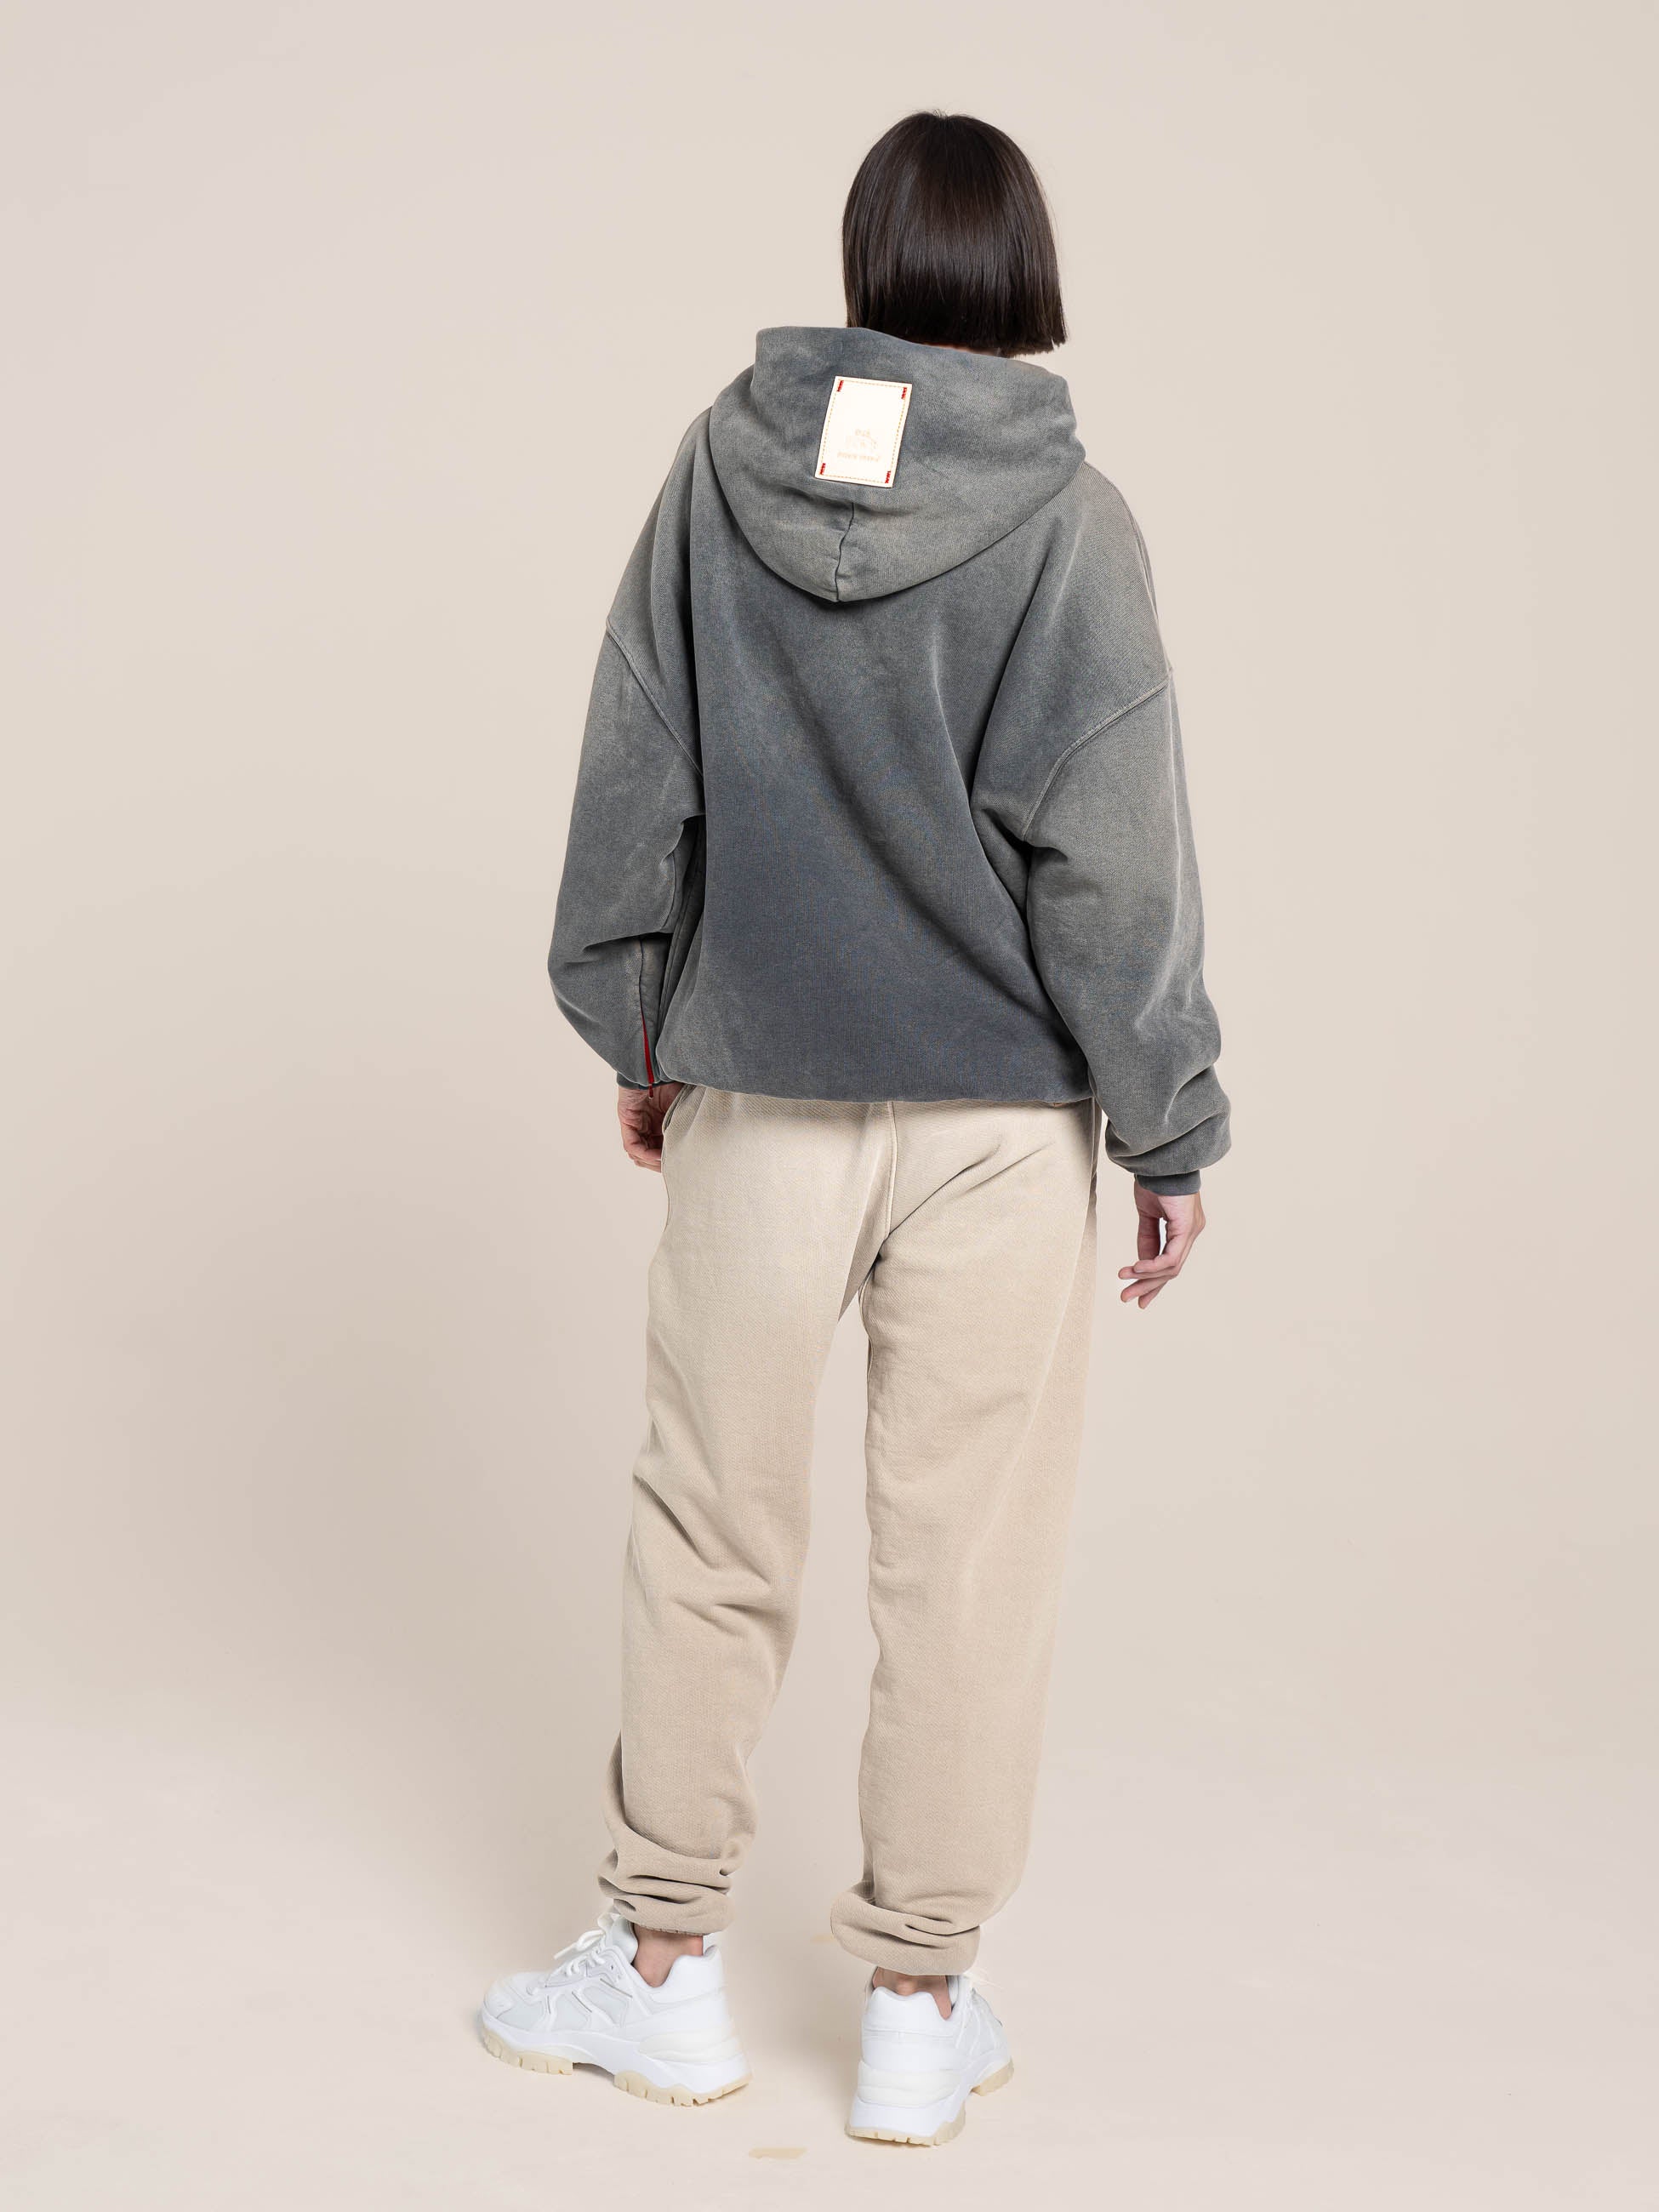 Female Model with the Grey Hoodie and Old Wood Sweatpants Luxury Made in USA